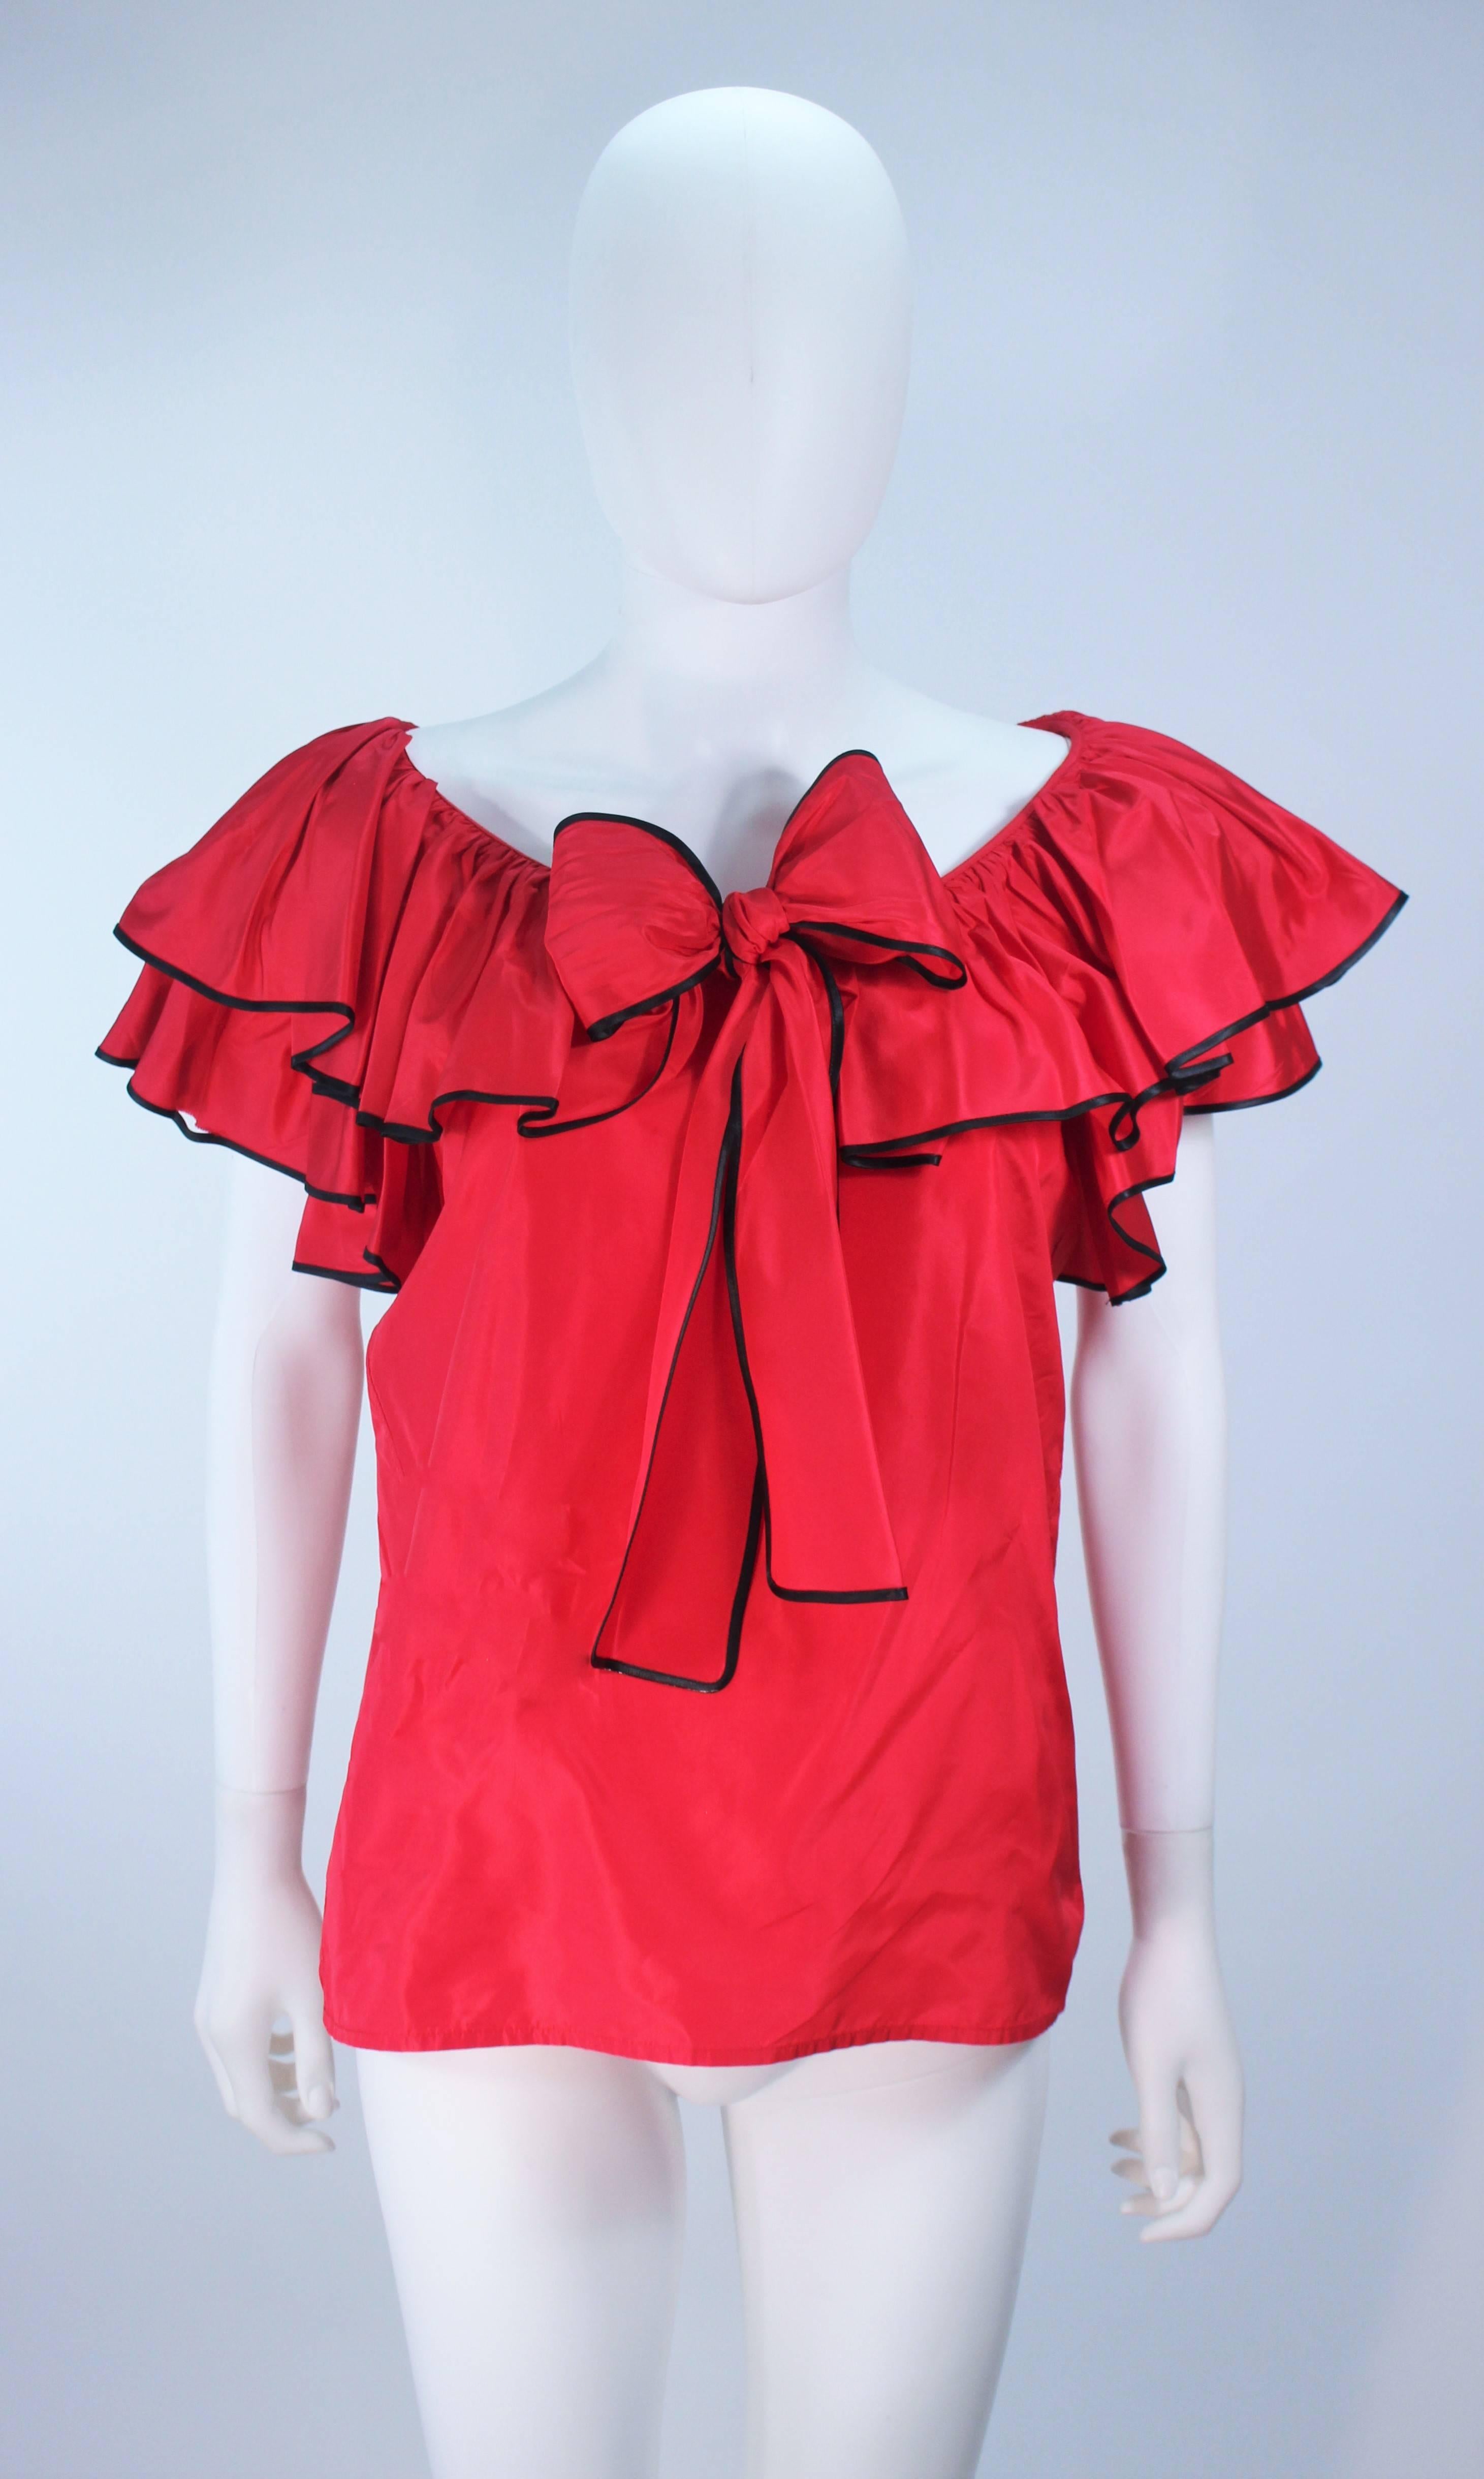 YVES SAINT LAURENT 1970's Red Satin Ruffled Ensemble with Black Trim Size 40 For Sale 3